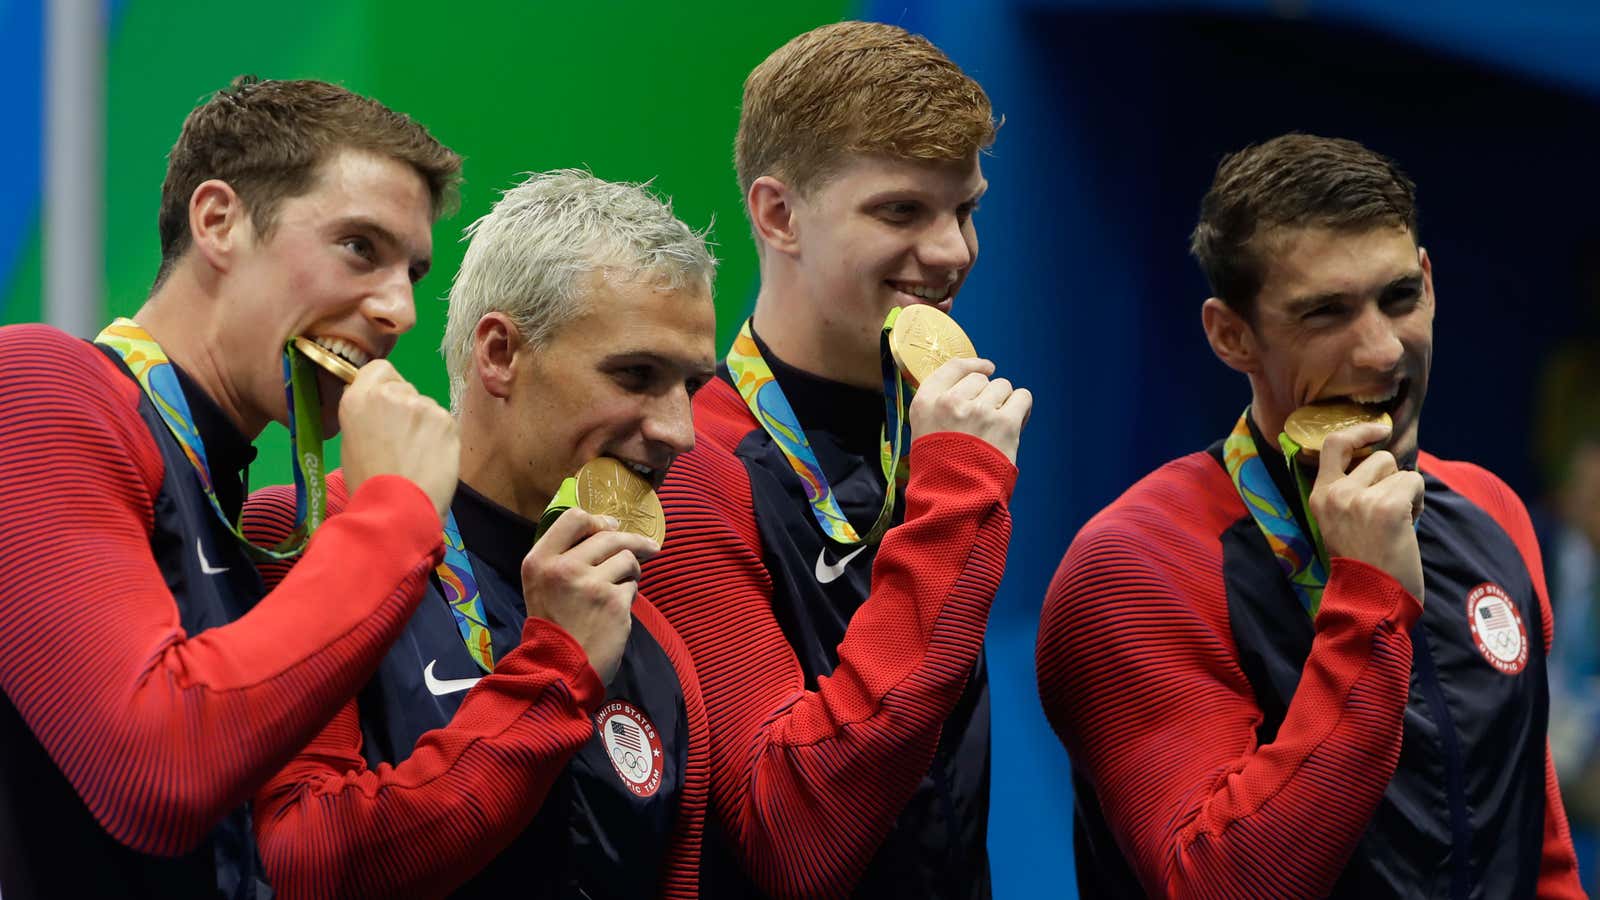 A happier moment for Lochte (second from the left), Phelps, and the other members of the US swimming team.